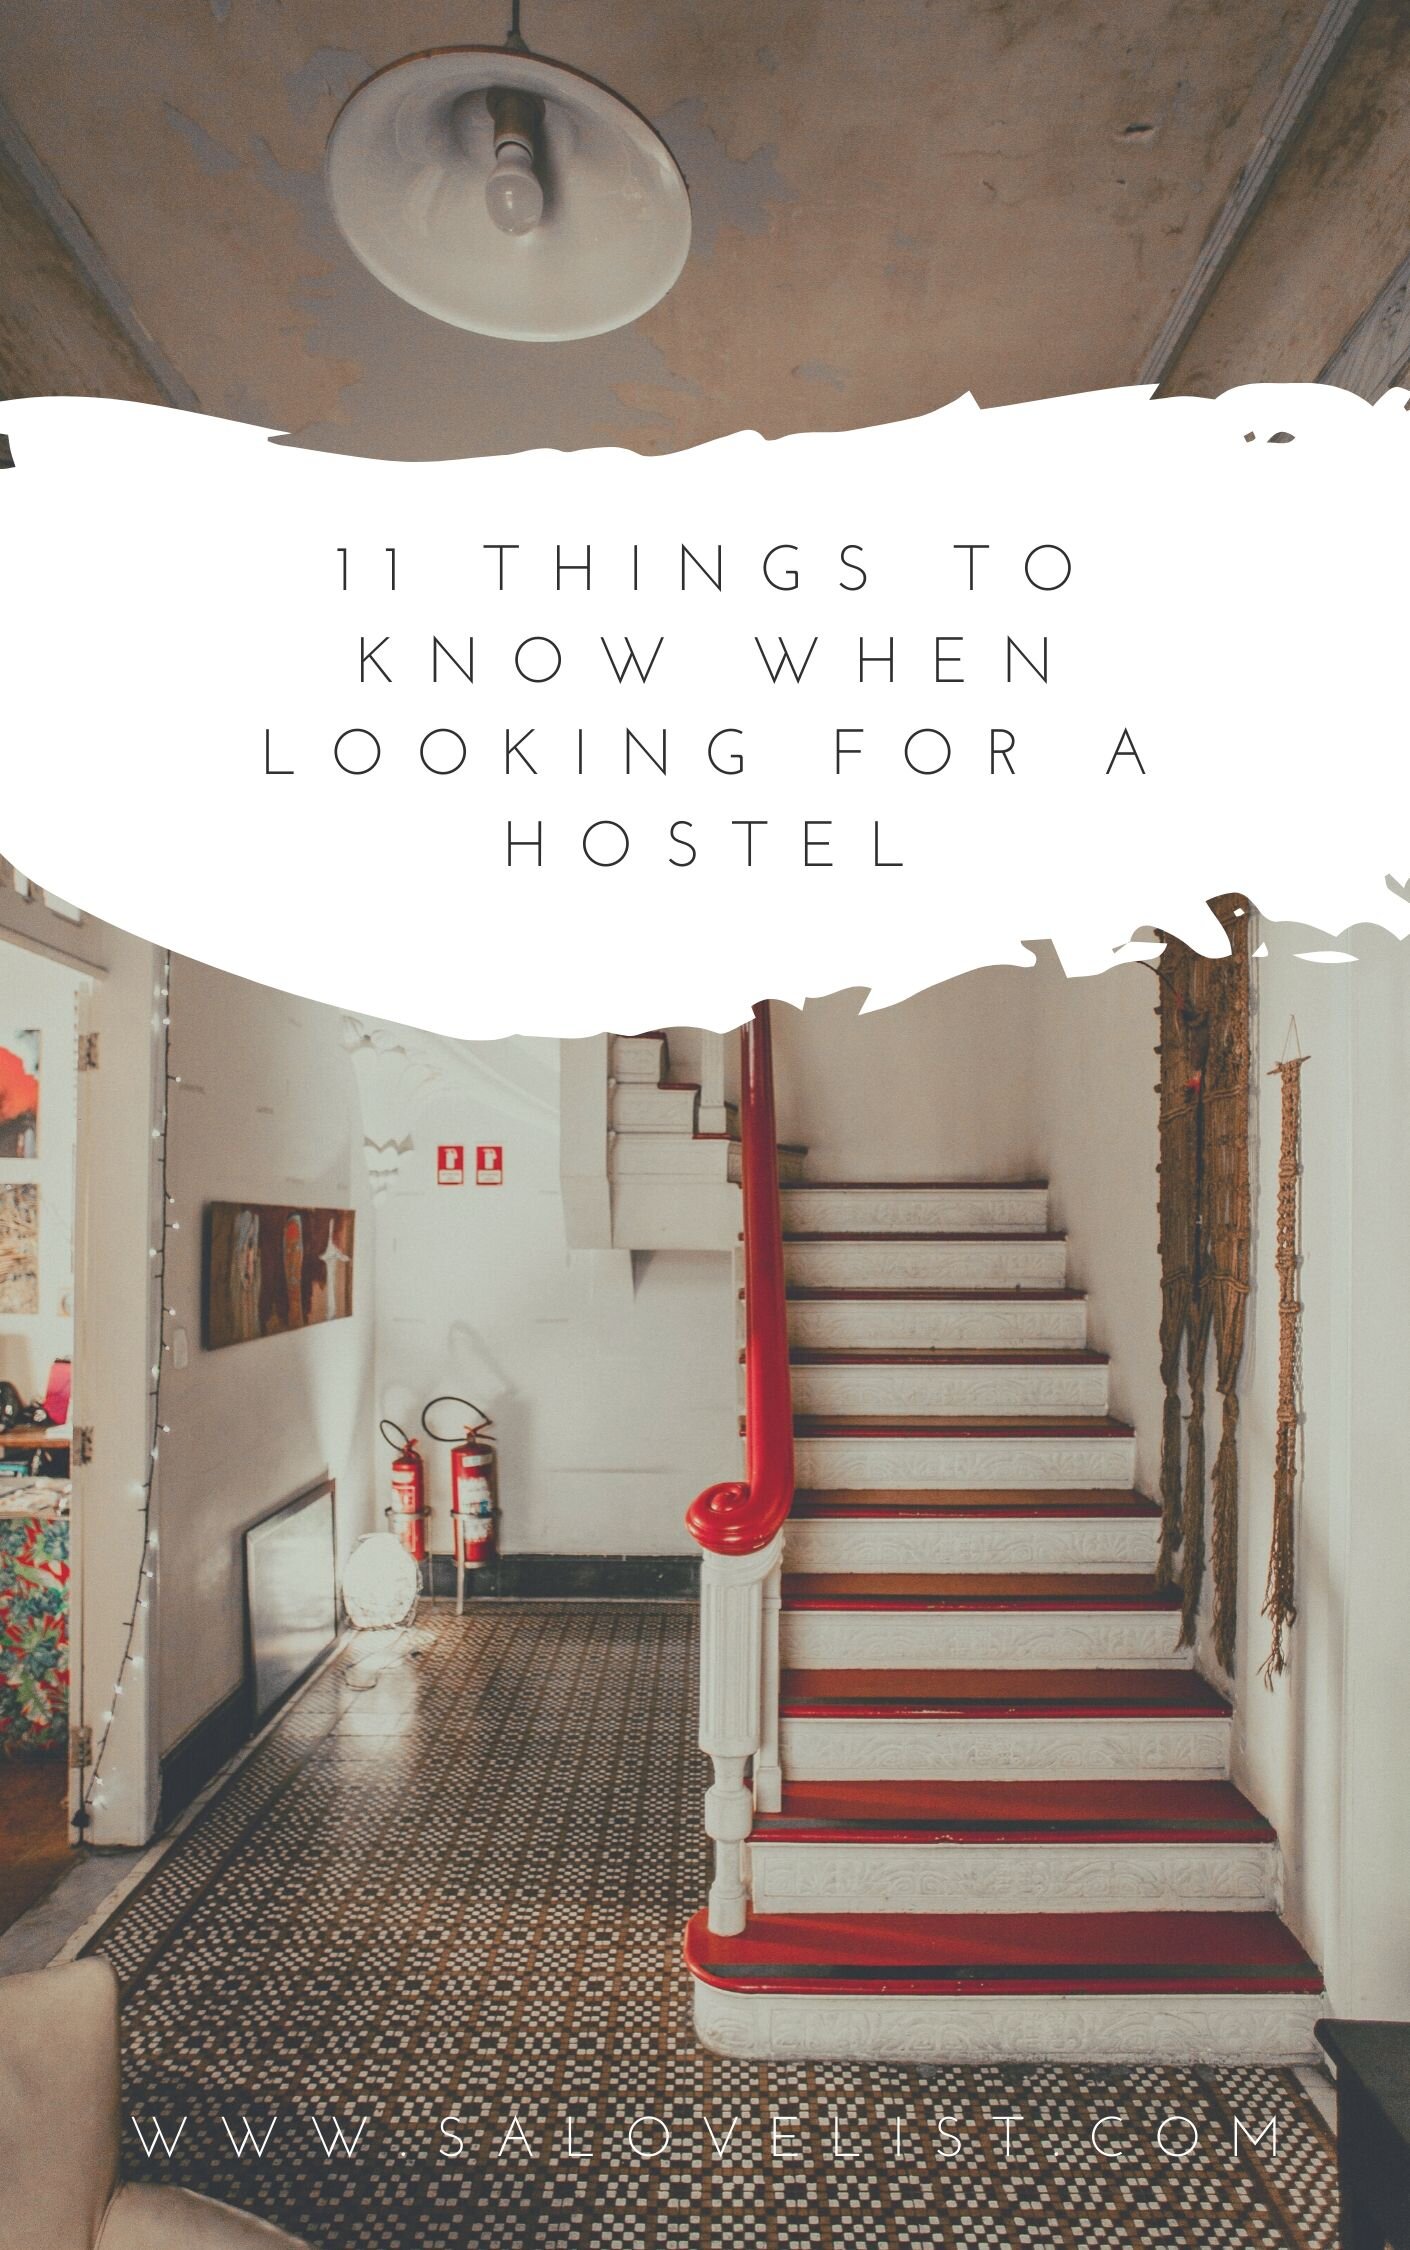 11 Things to know when looking for a hostel (1).jpg